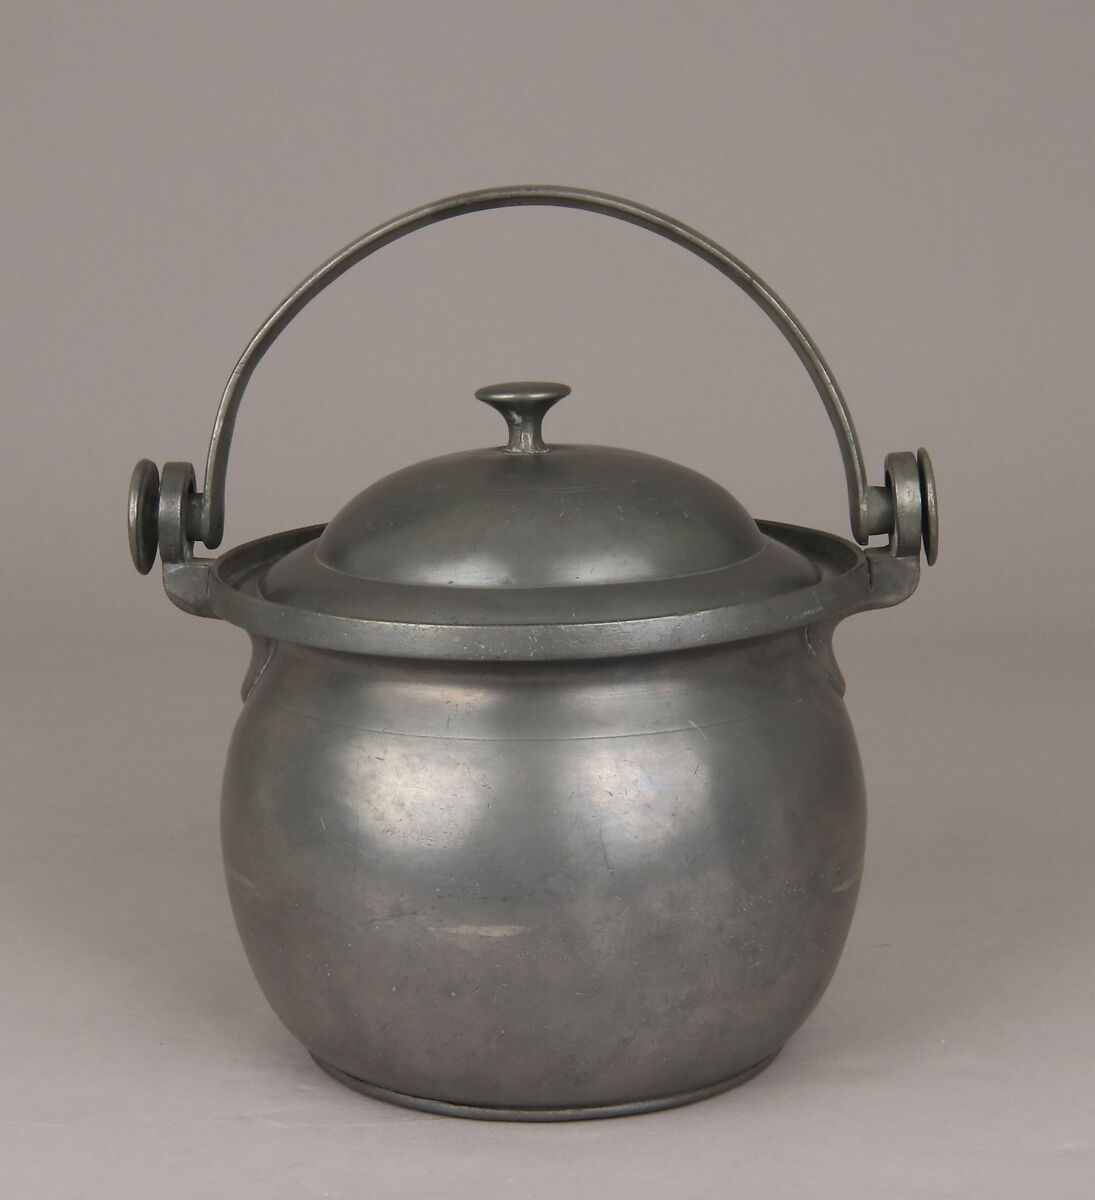 Dinner pail, Pewter, French 